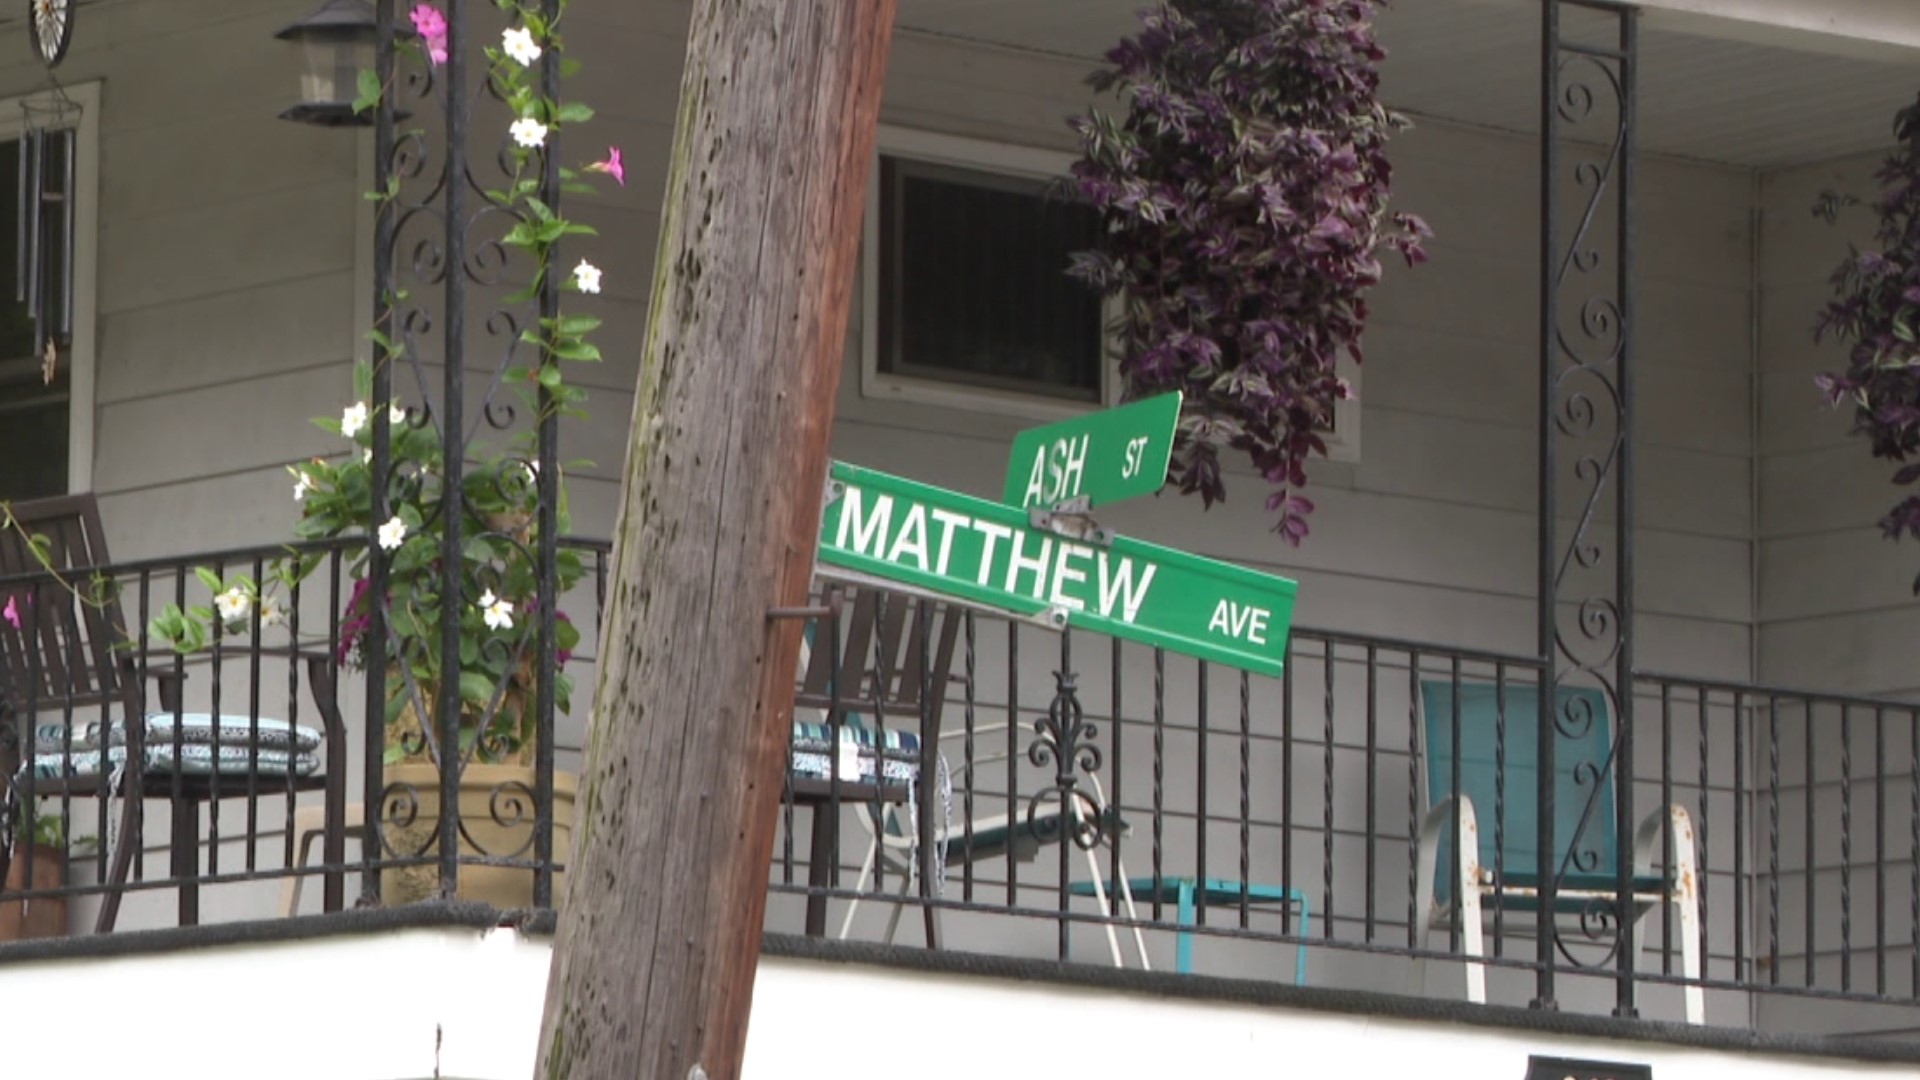 Officials say two officers were taken to the hospital after falling more than 10 feet during an investigation along Matthew Avenue Saturday morning.